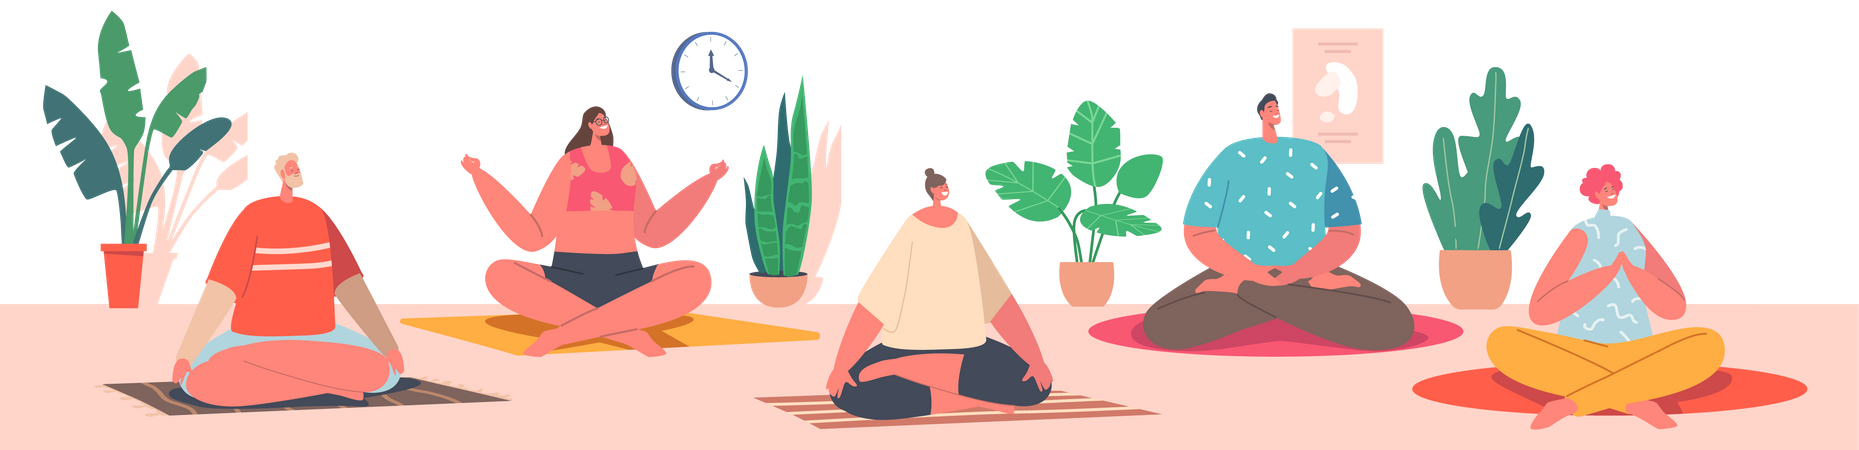 People doing yoga together at yoga class Illustration